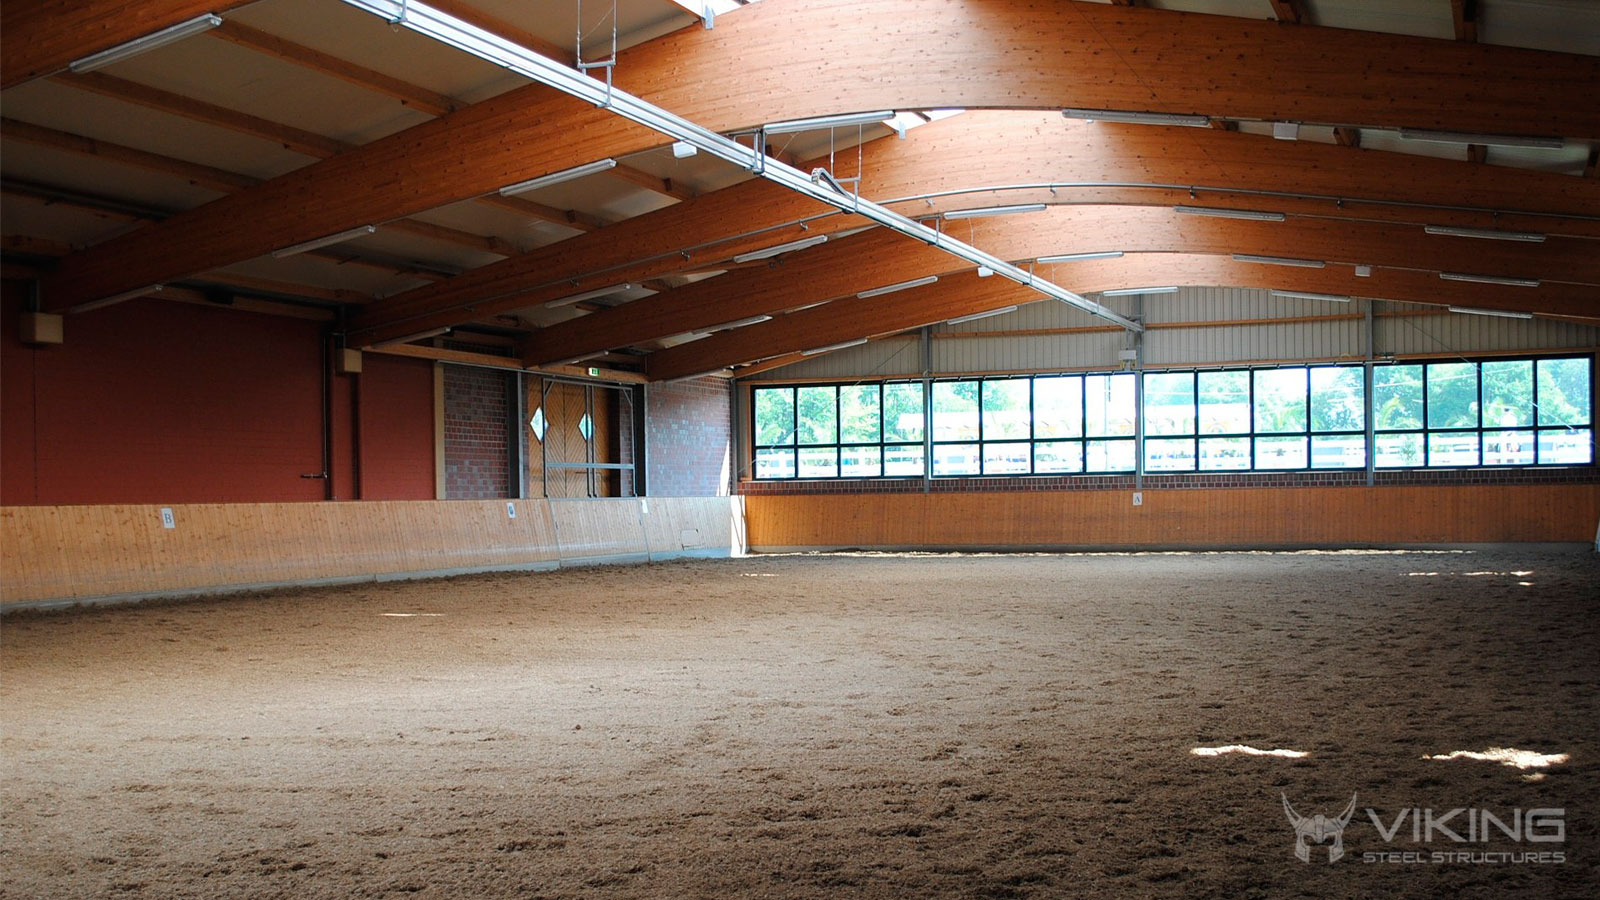 Plan a Perfect Equestrian Arena with Prefab Metal Building